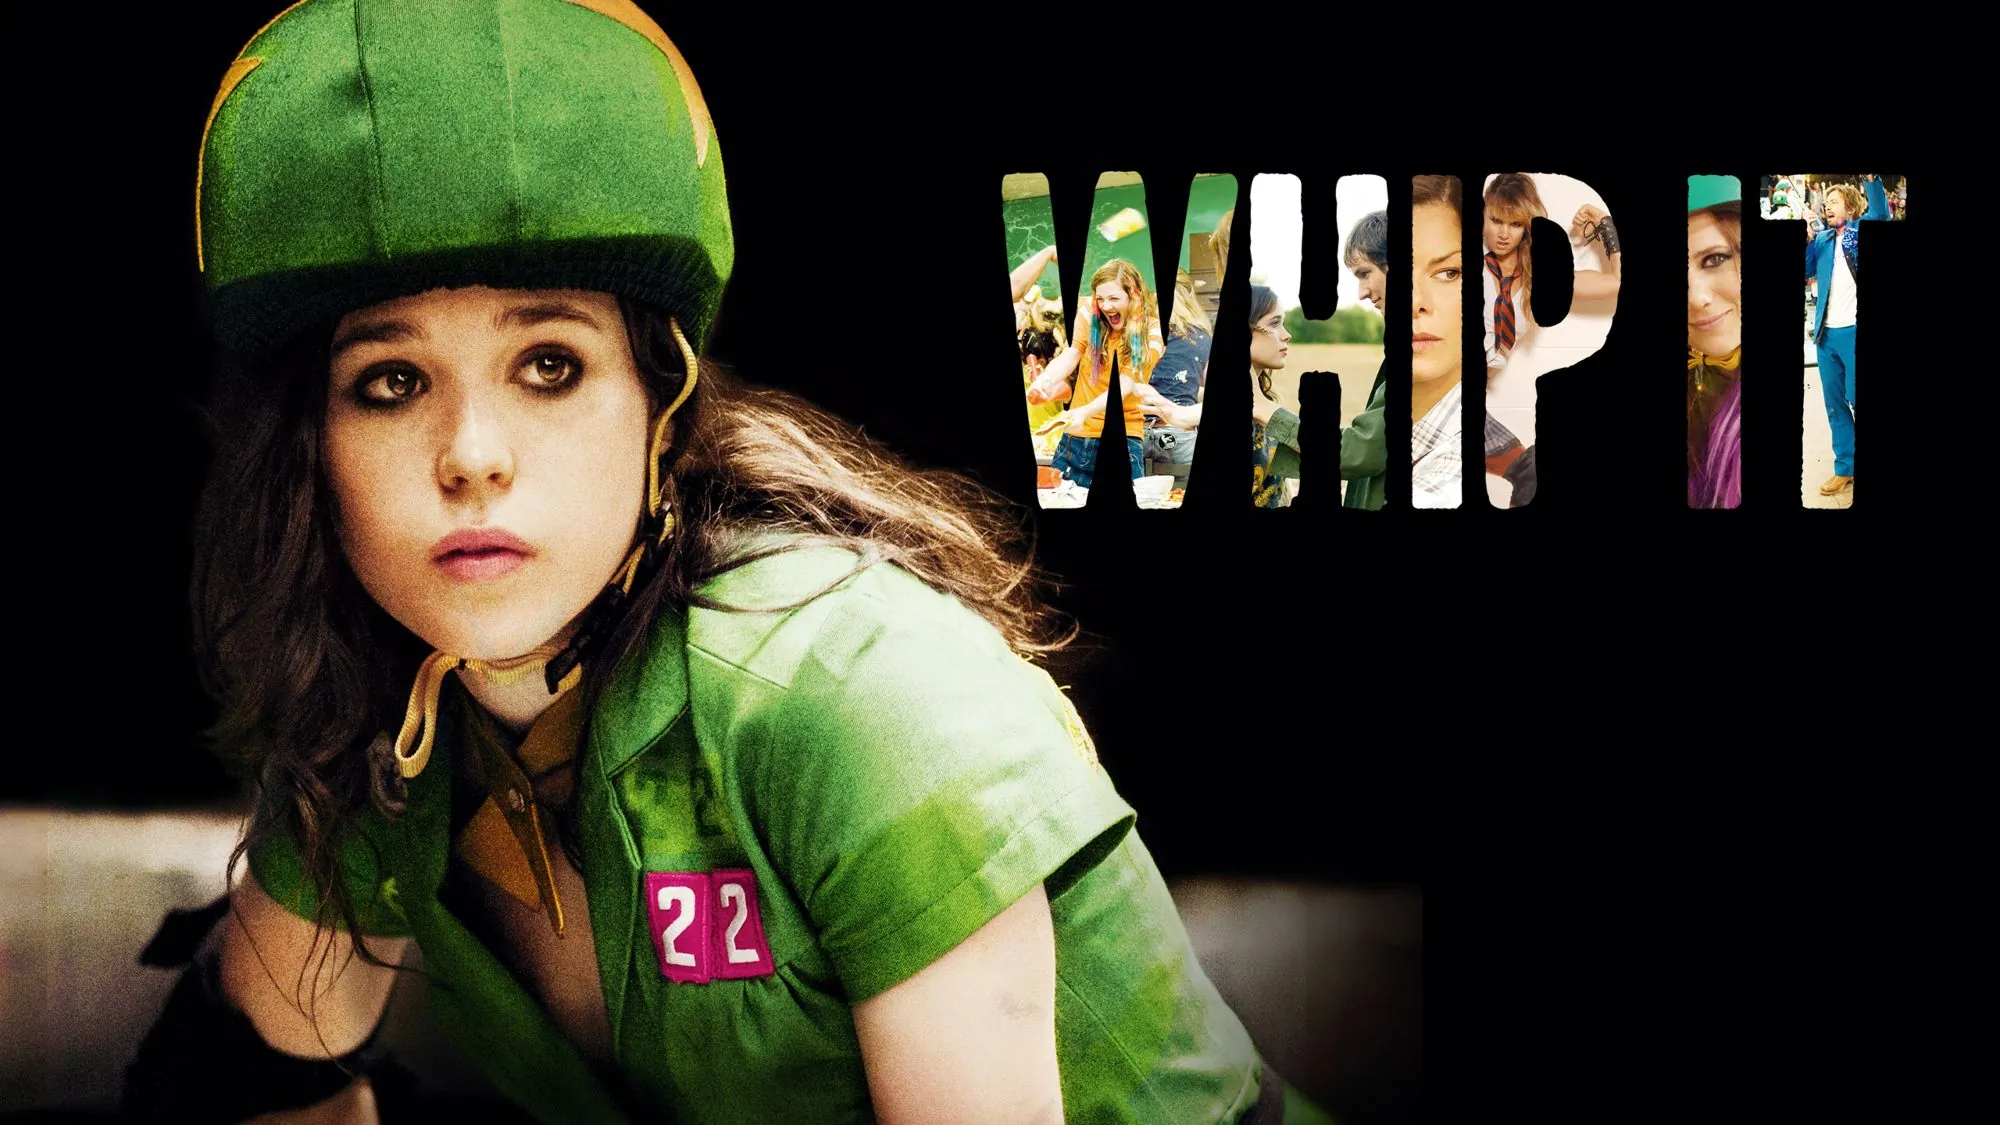 Whip It (2009)